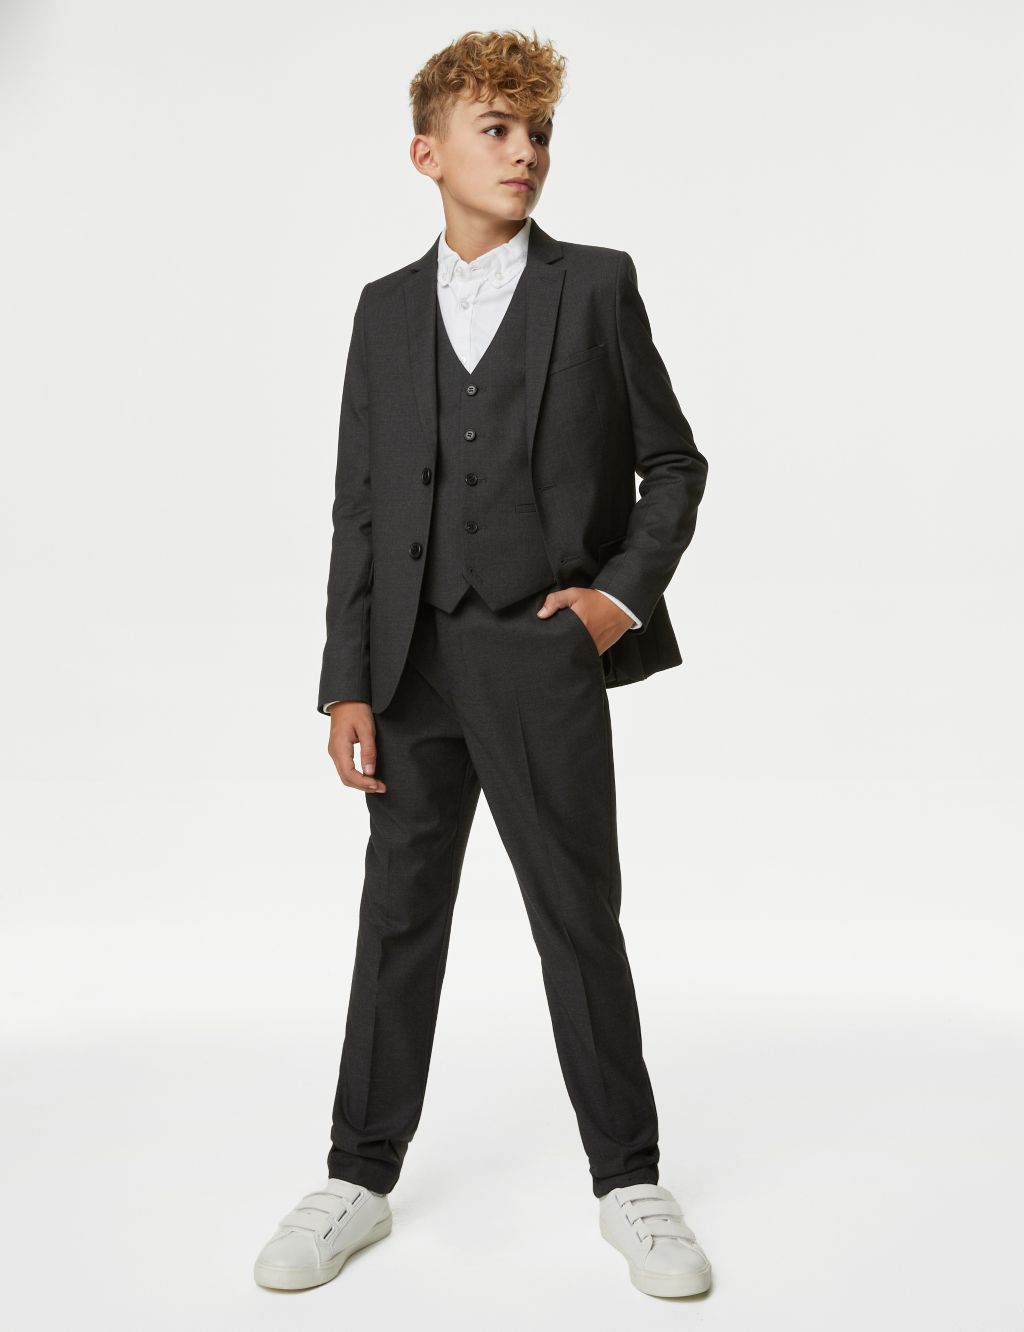 Jacket, Trouser & Waistcoat Outfit image 6